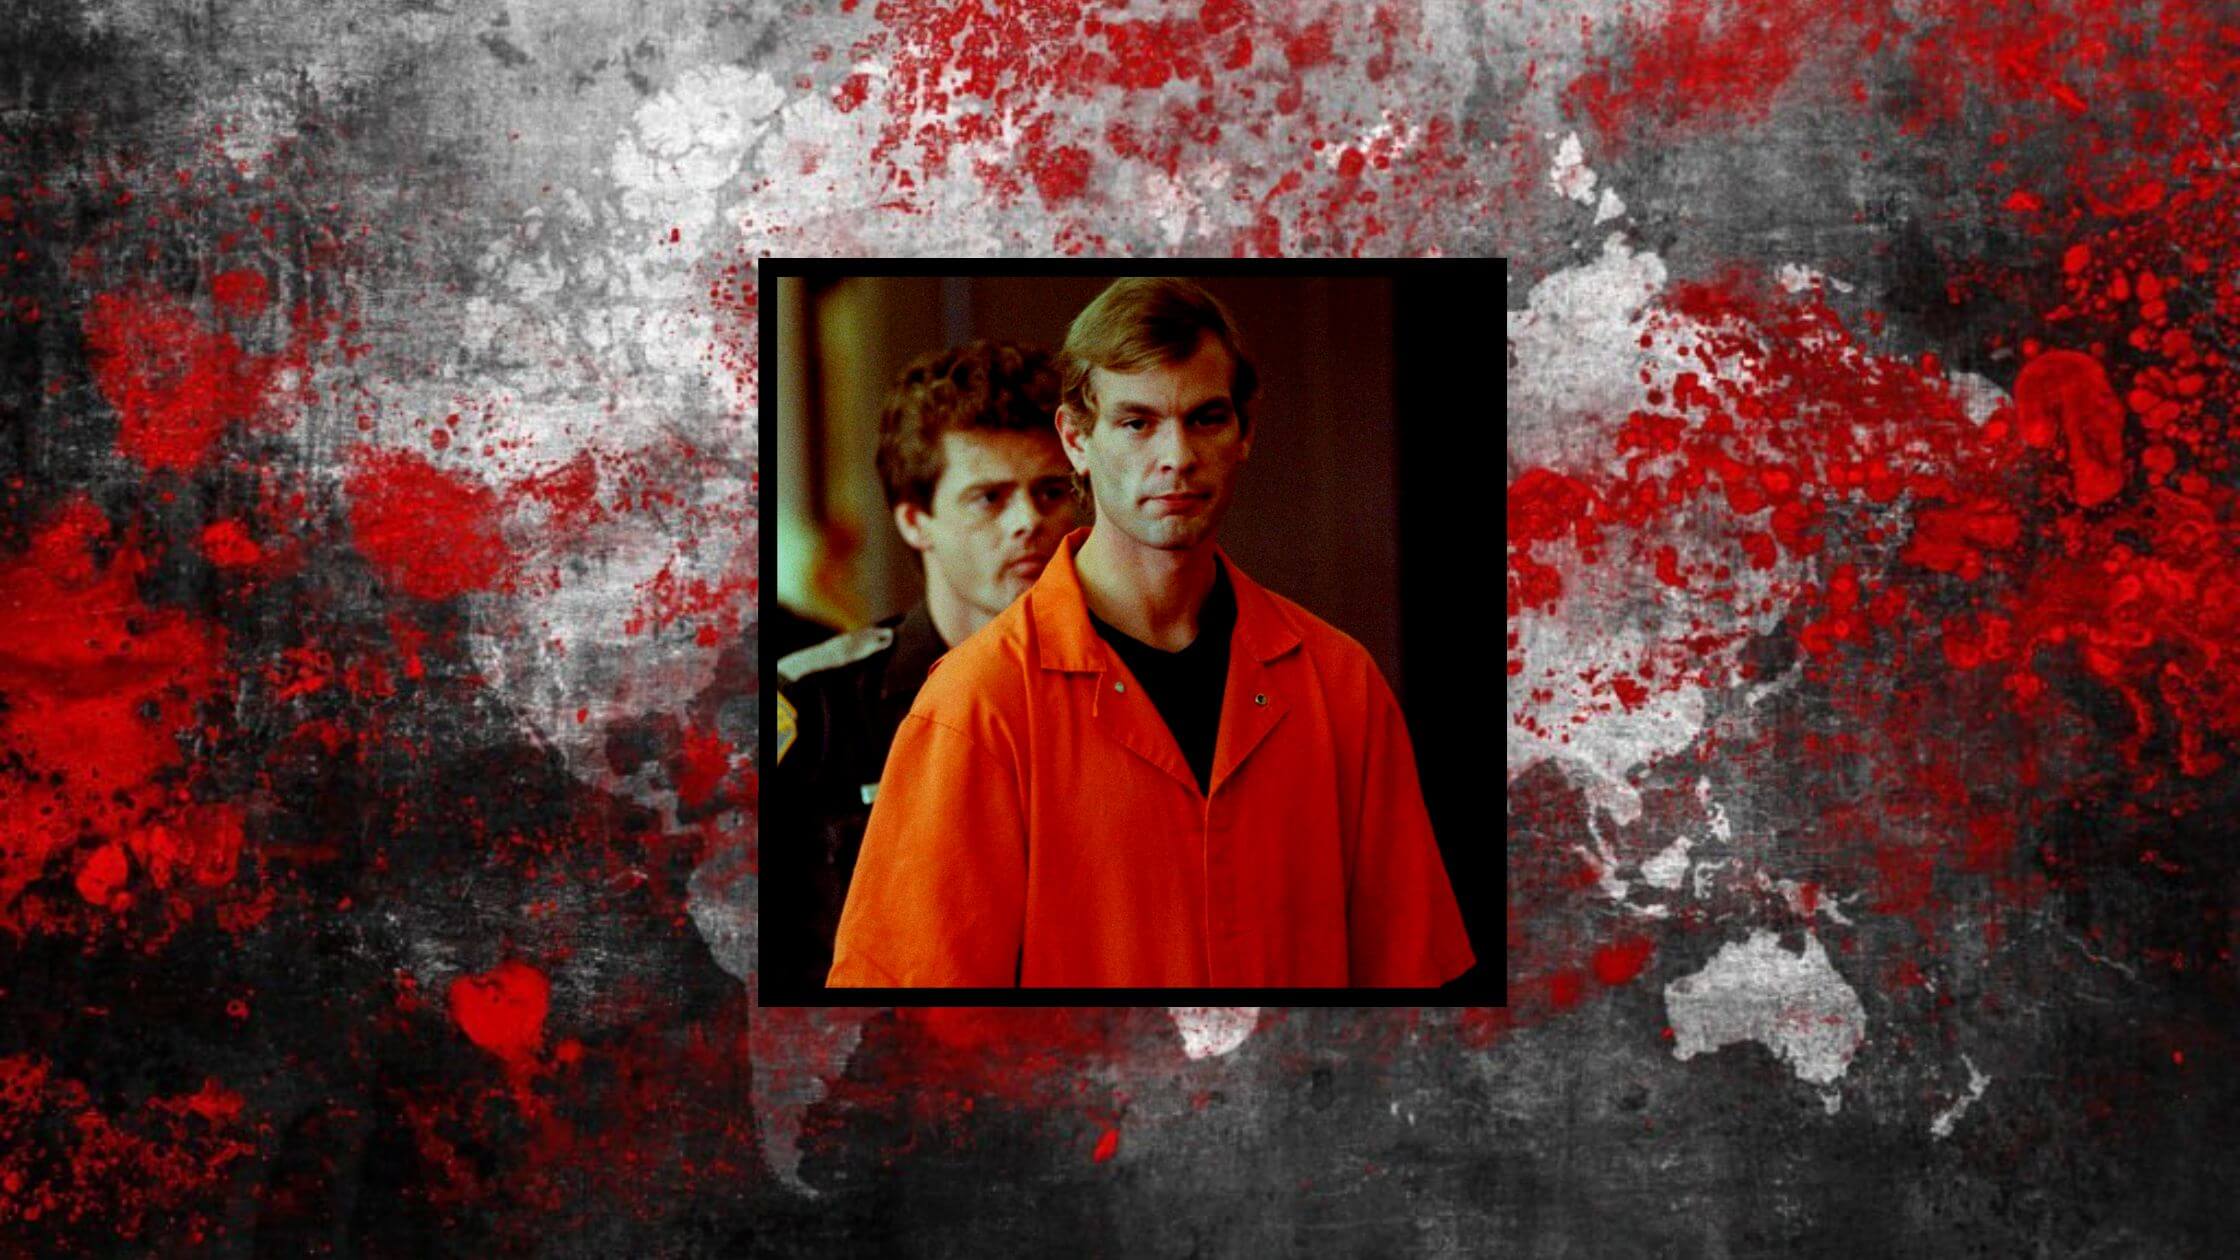 Jeffrey Dahmer Costumes Are Not Permitted At LGBTQ Pubs In Milwaukee